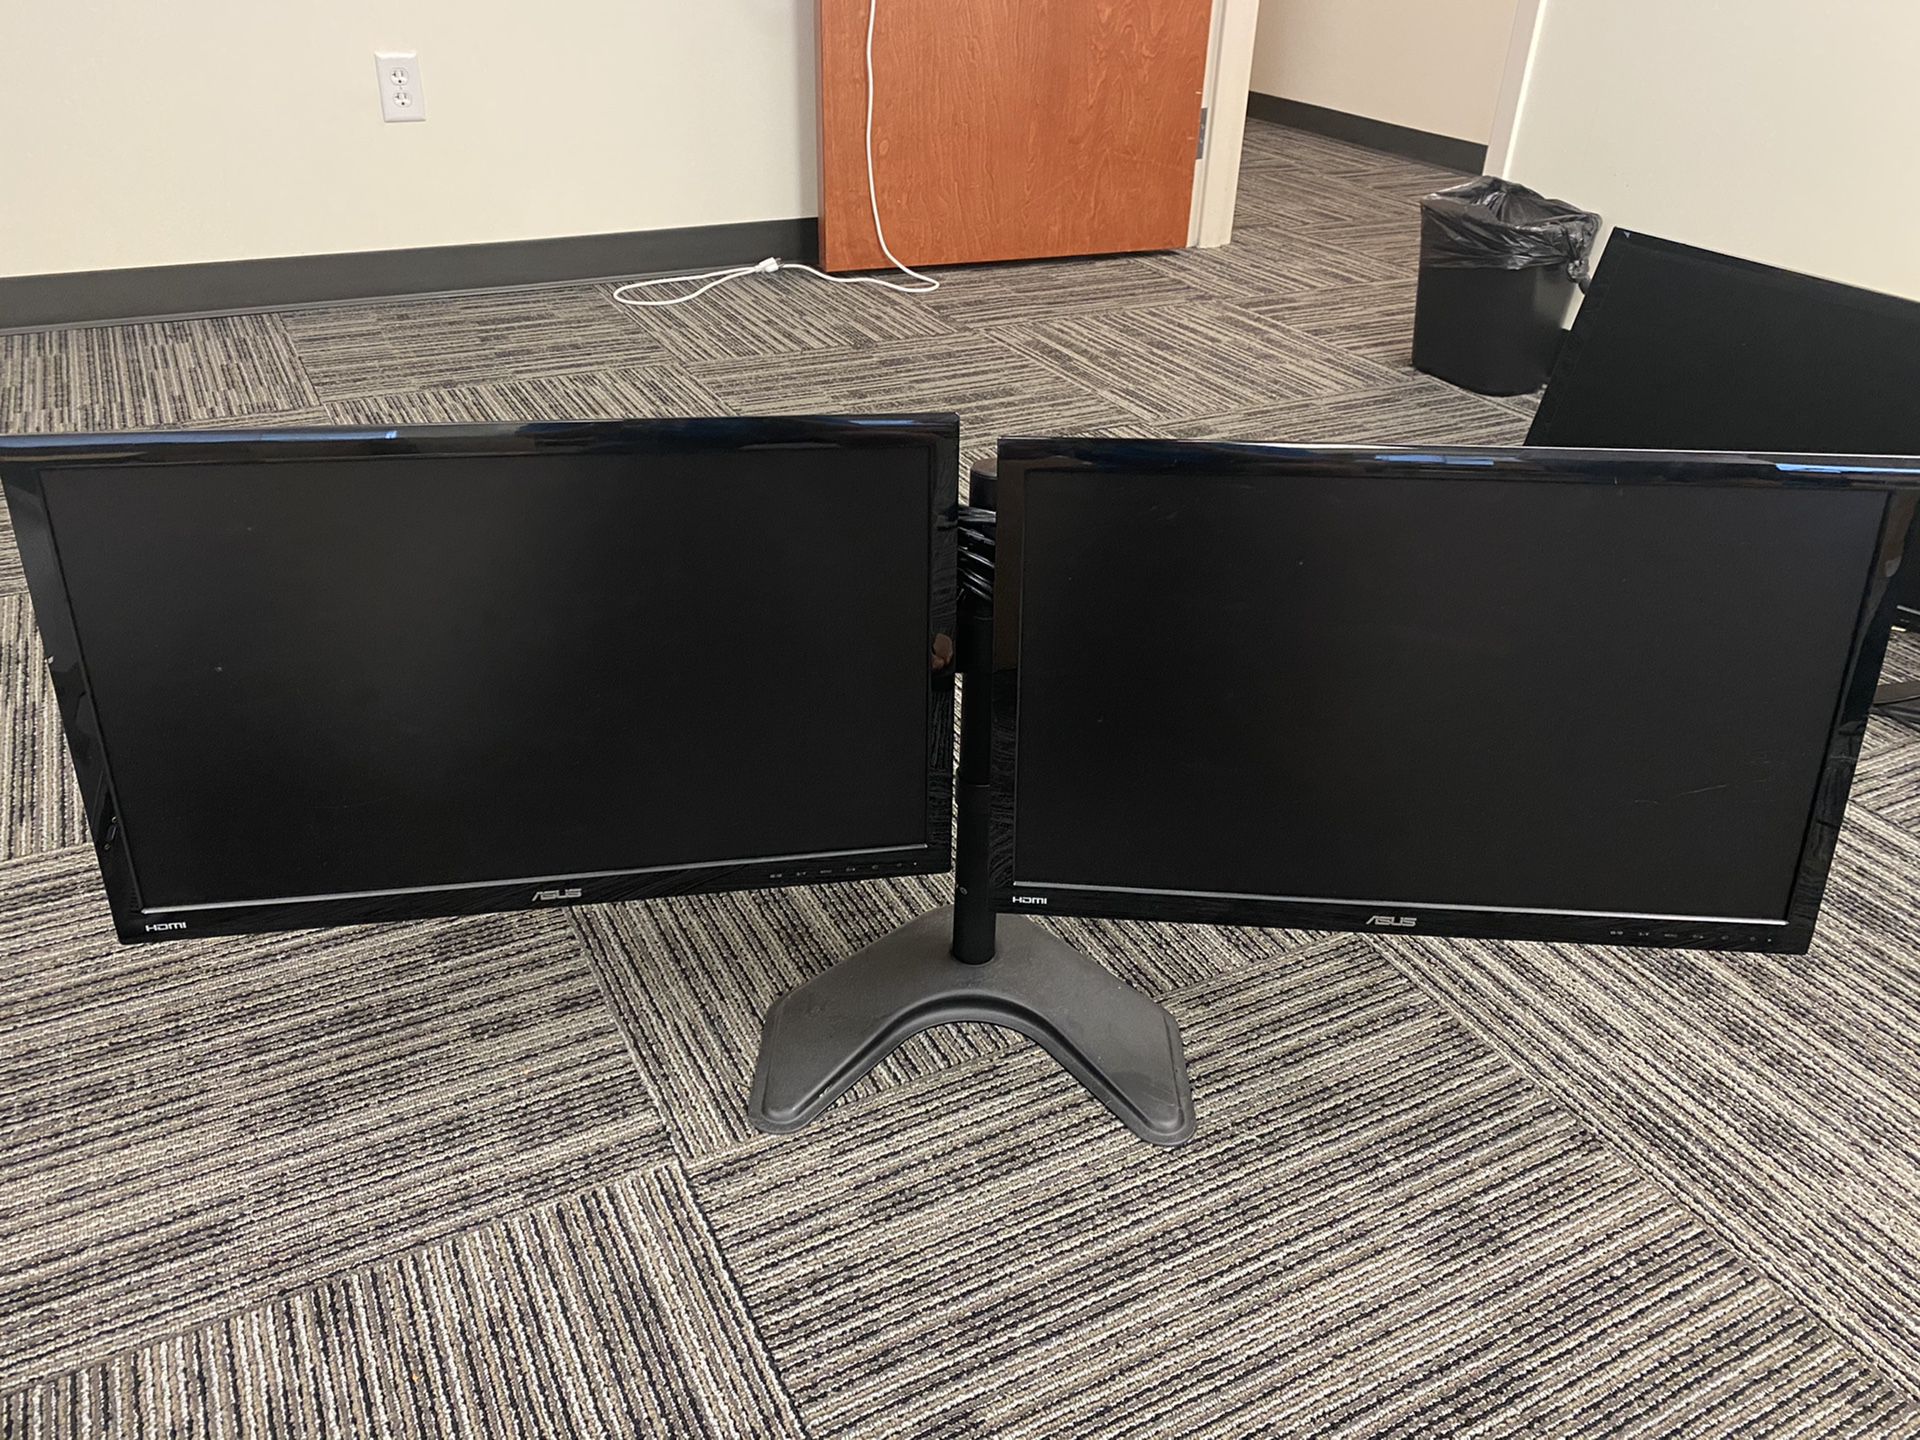 Multiple Dual Monitor Setups with Bionic Arm Stand - $150